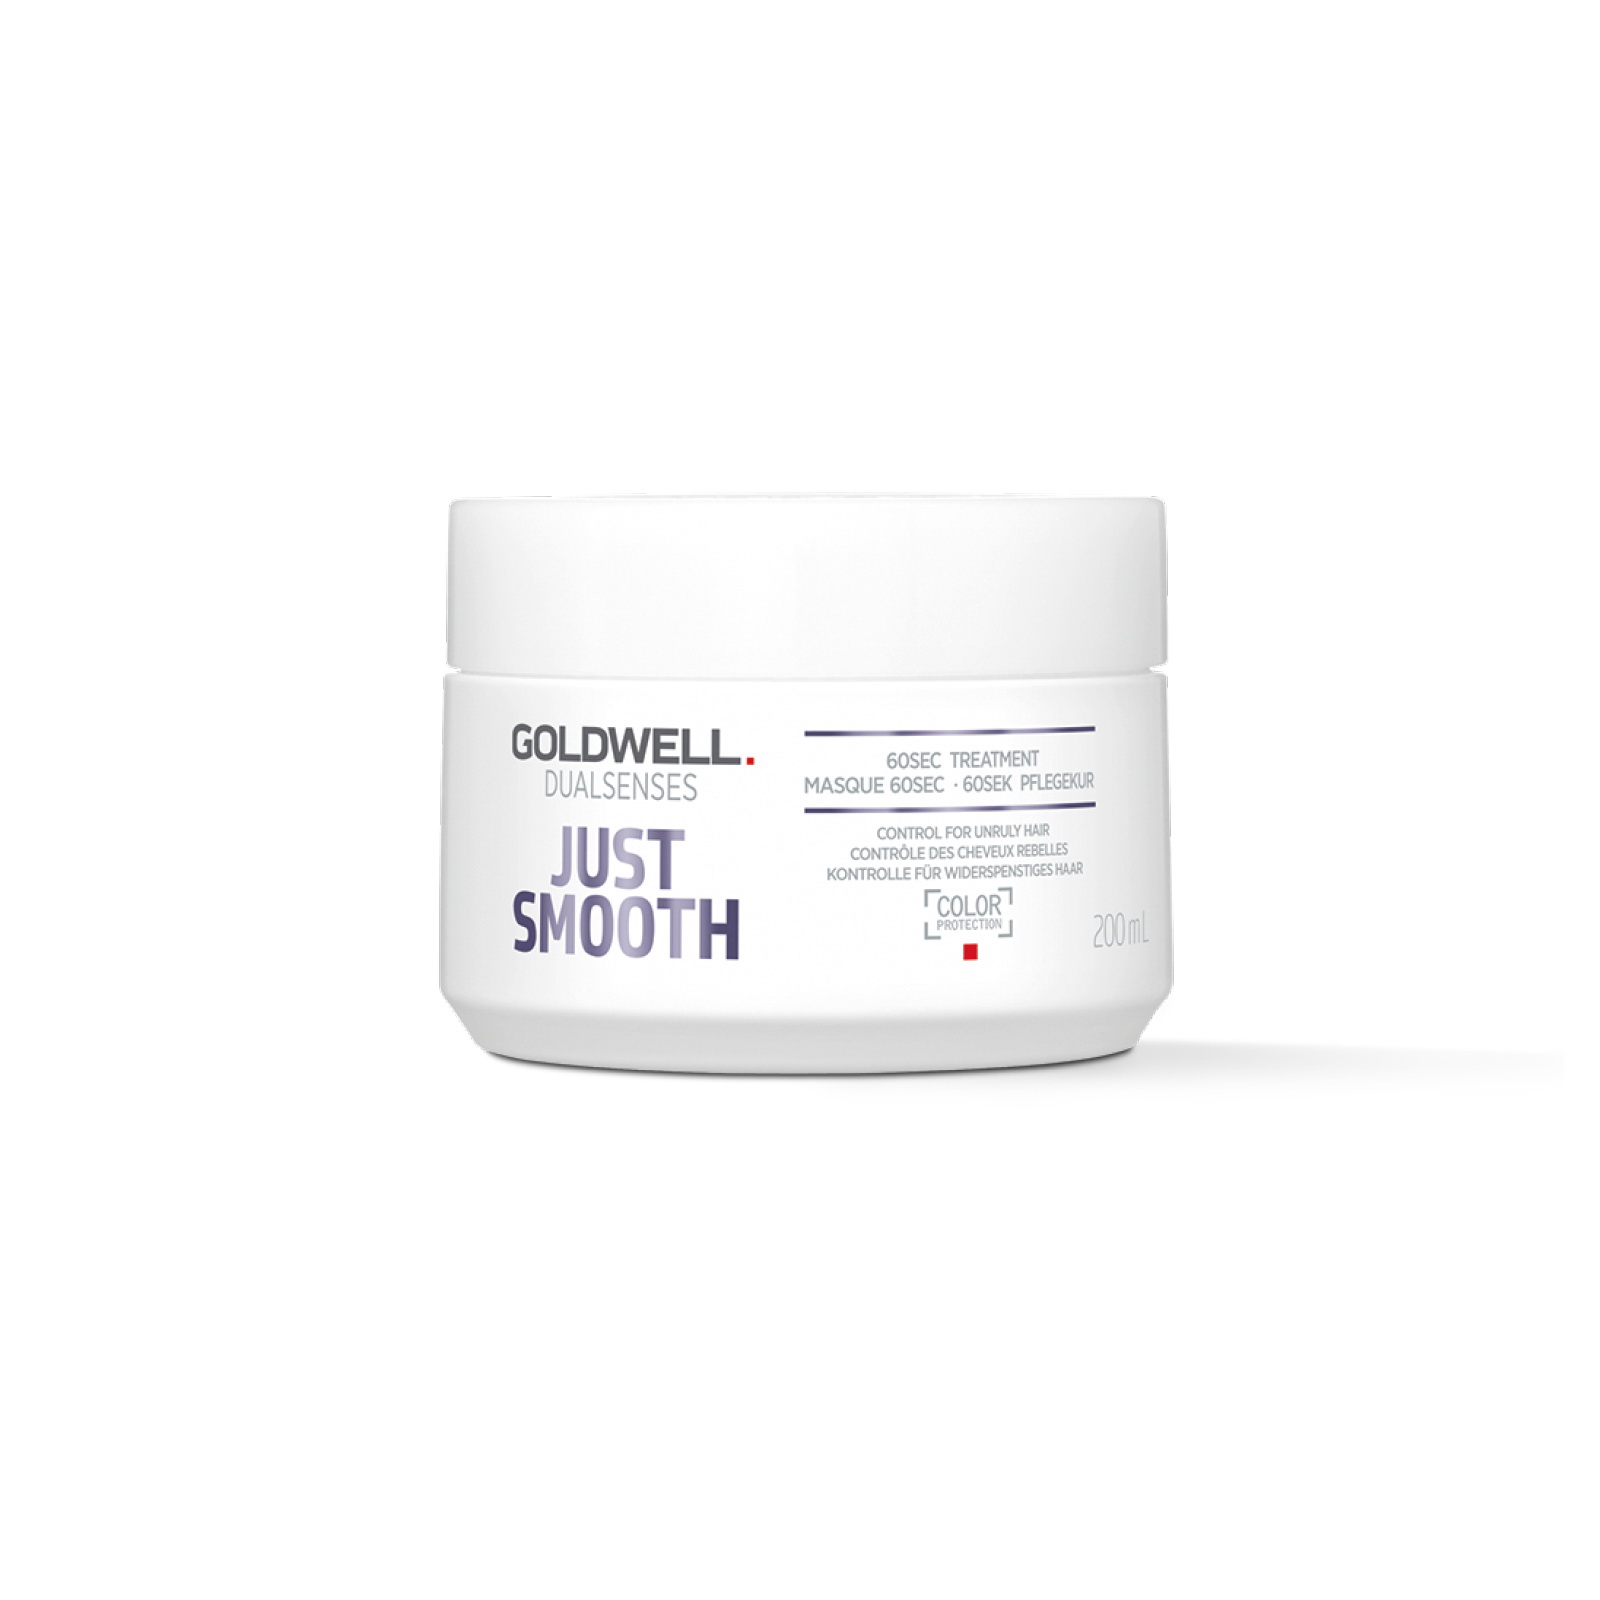 GOLDWELL Just Smooth 60s Treatment 200ml